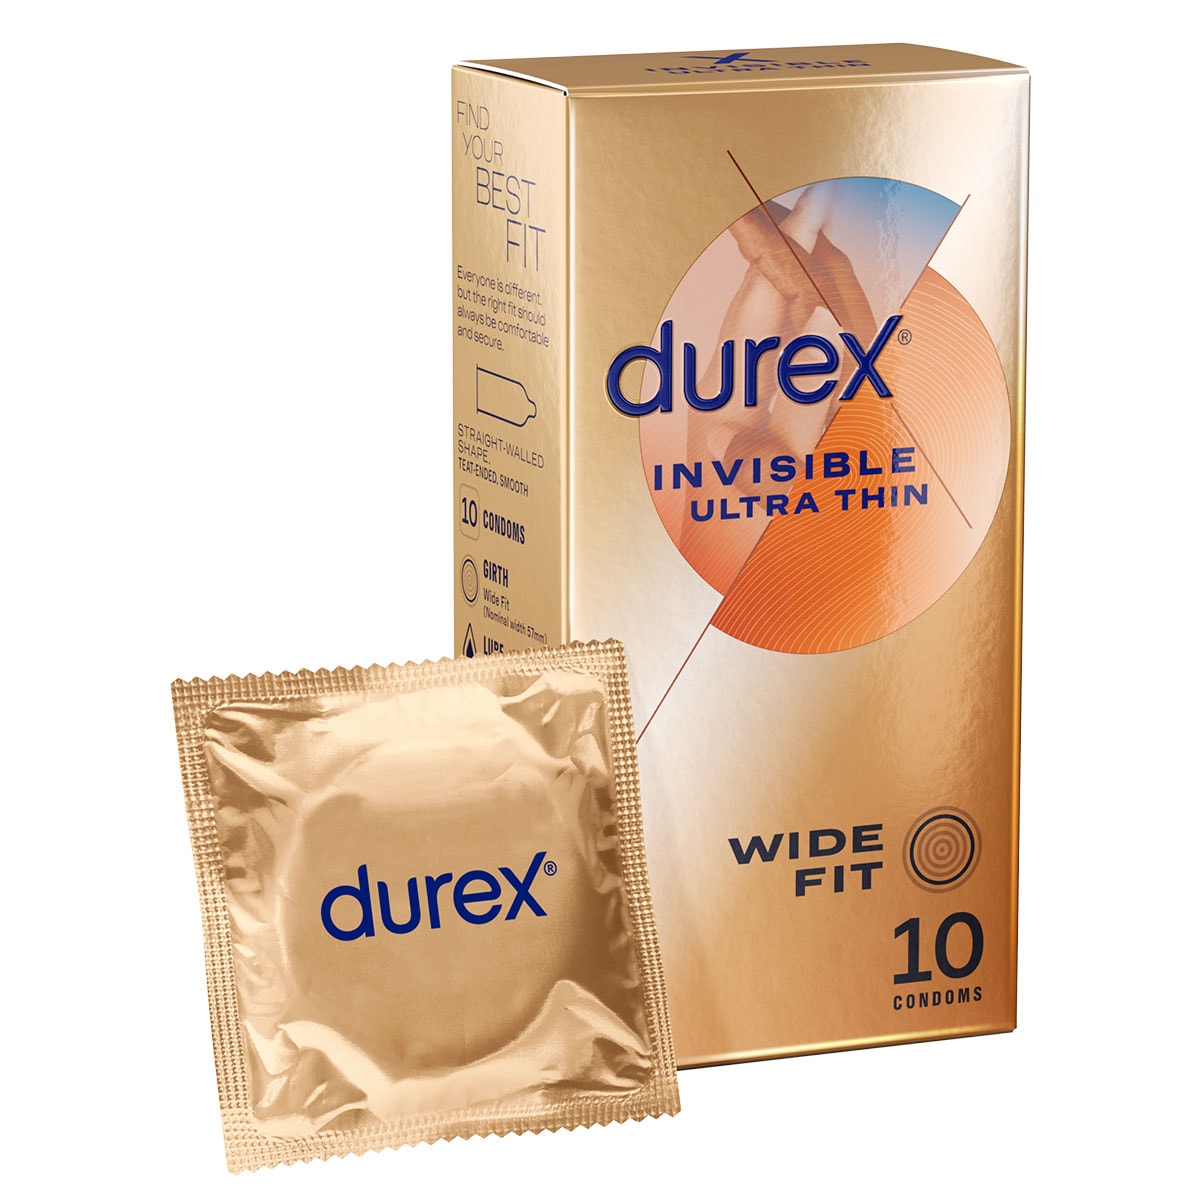 Durex INVISIBLE - XL Extra Large 3's